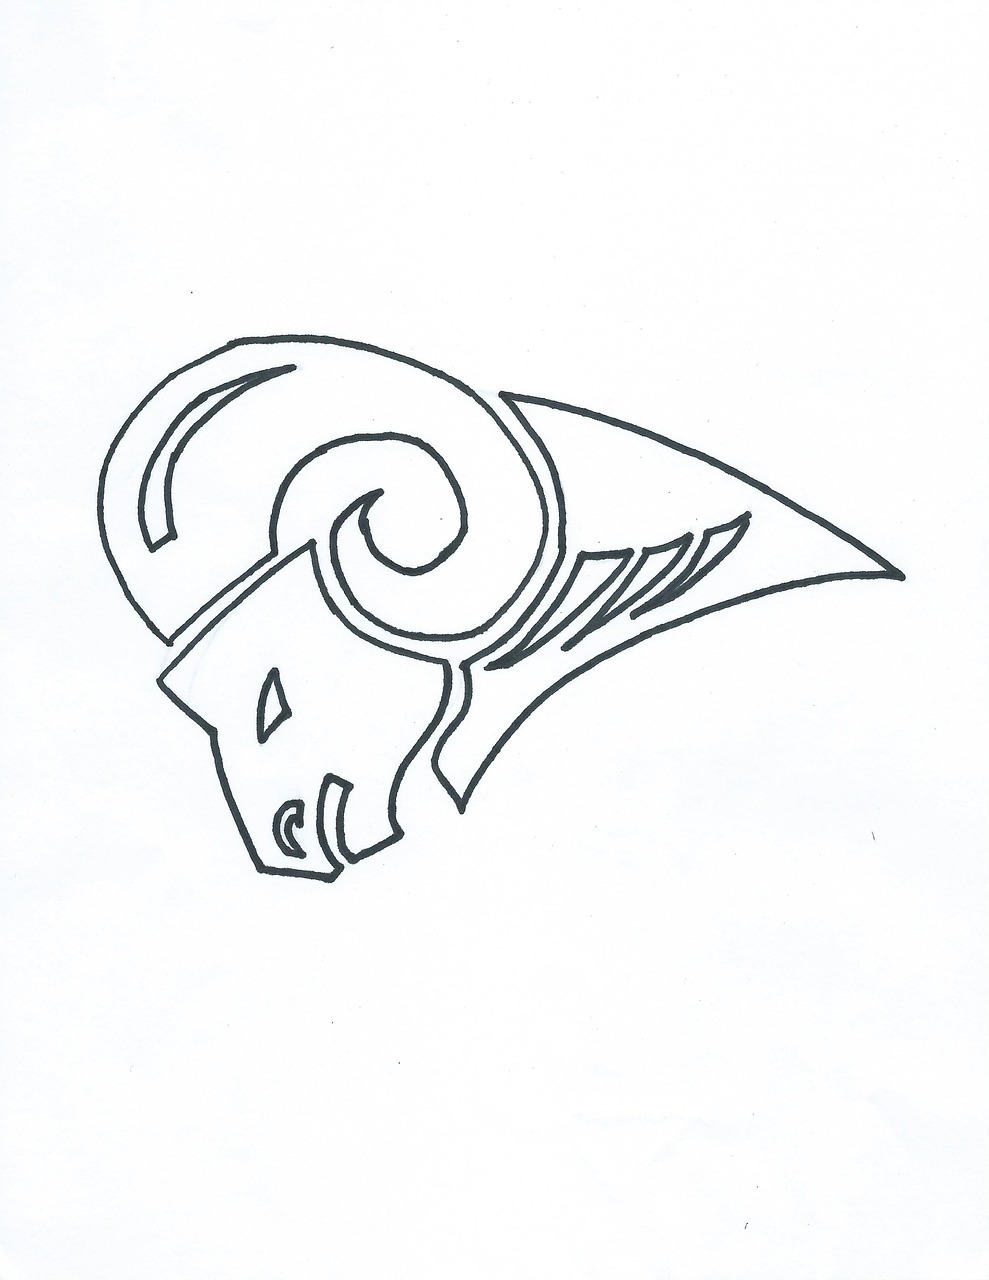 Ram,sheep,sketch,outline,animal - free image from 